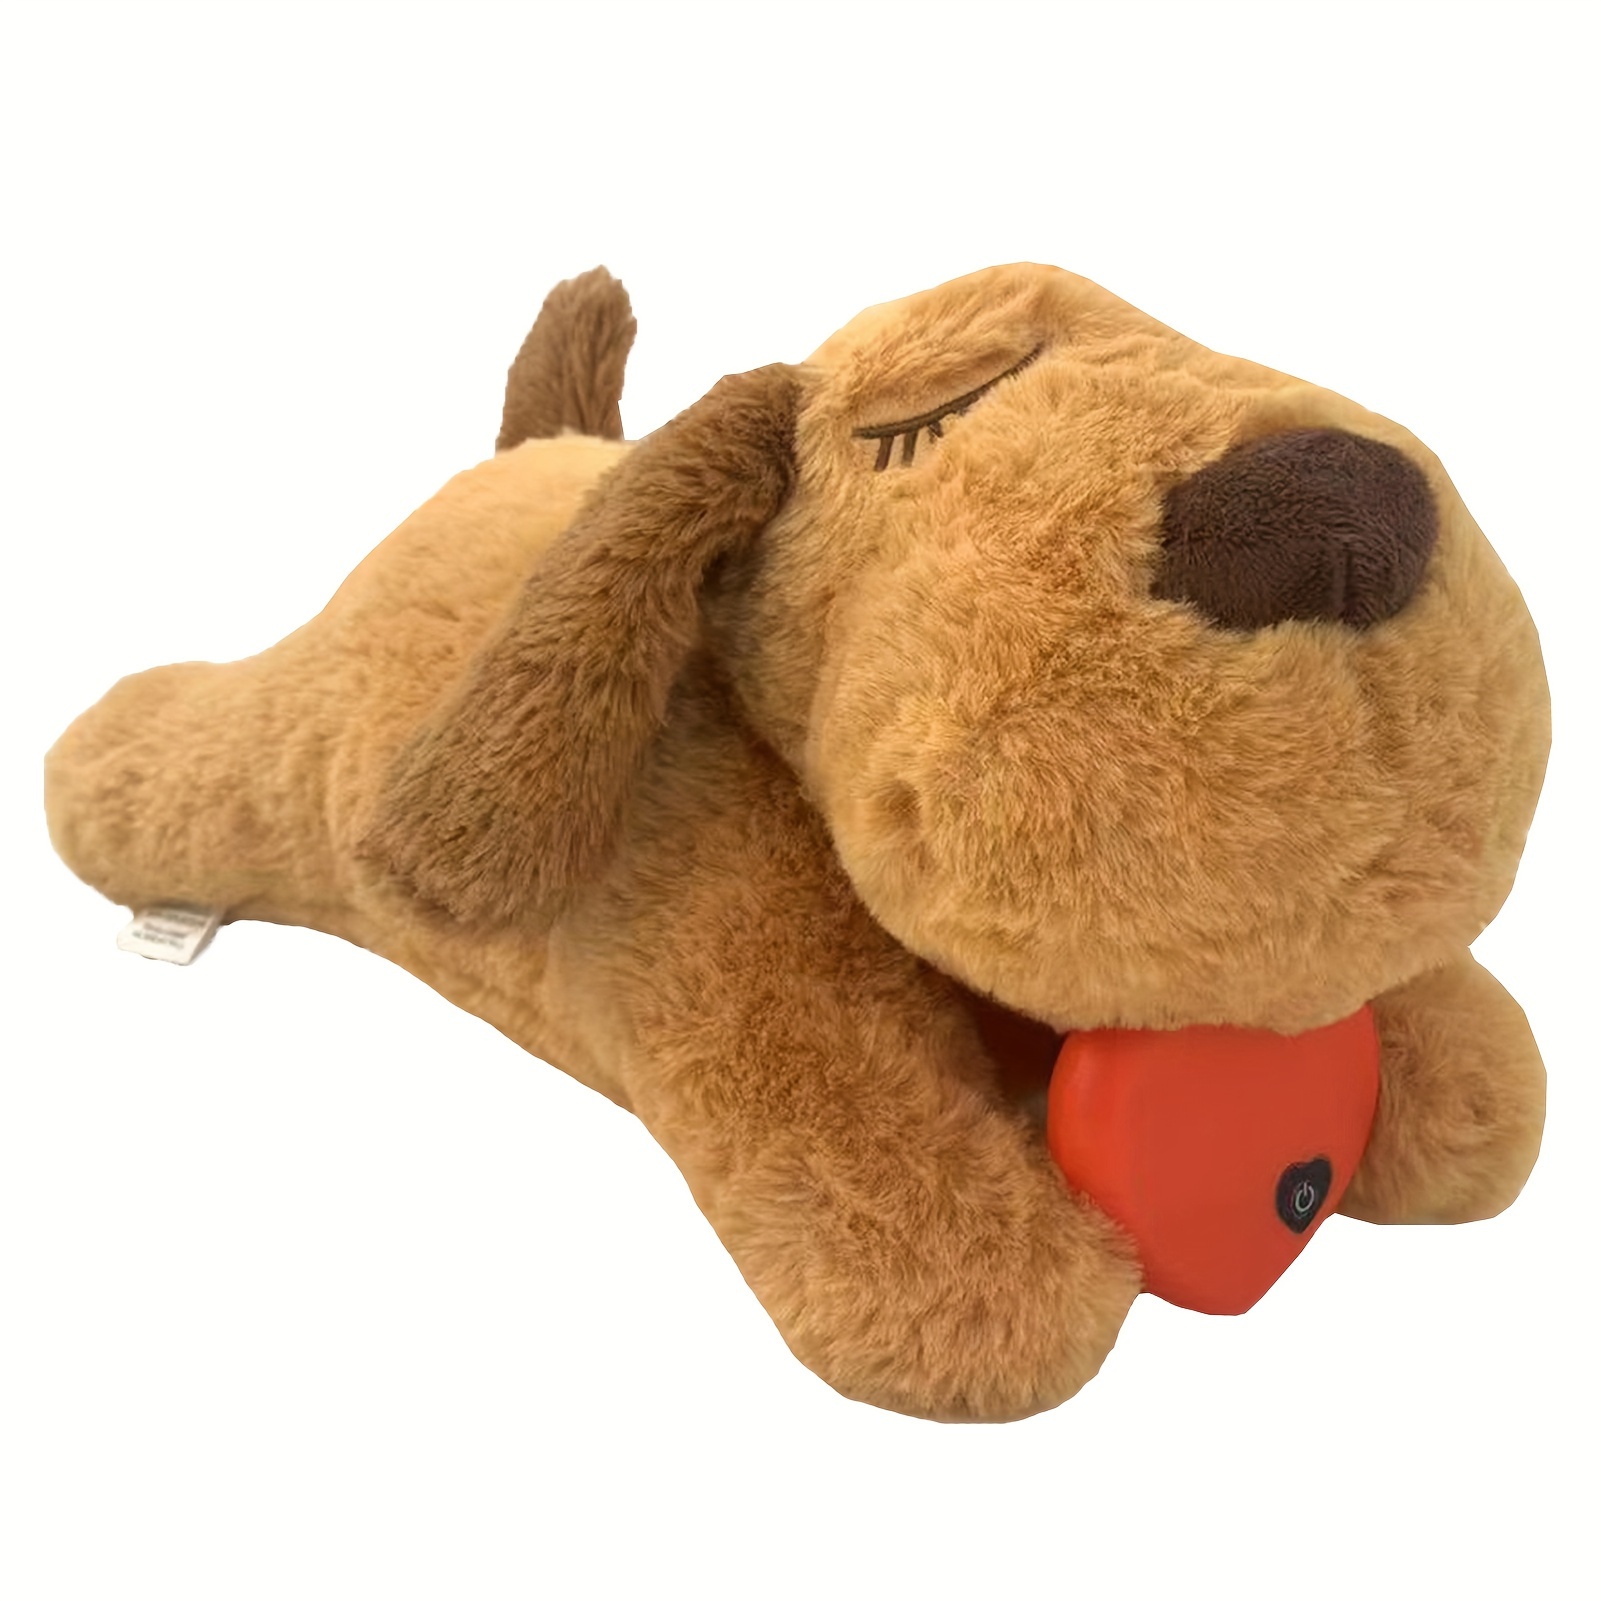 Puppy Heartbeat Toy, Puppies Separation Anxiety Dog Toy, Sleep Aid